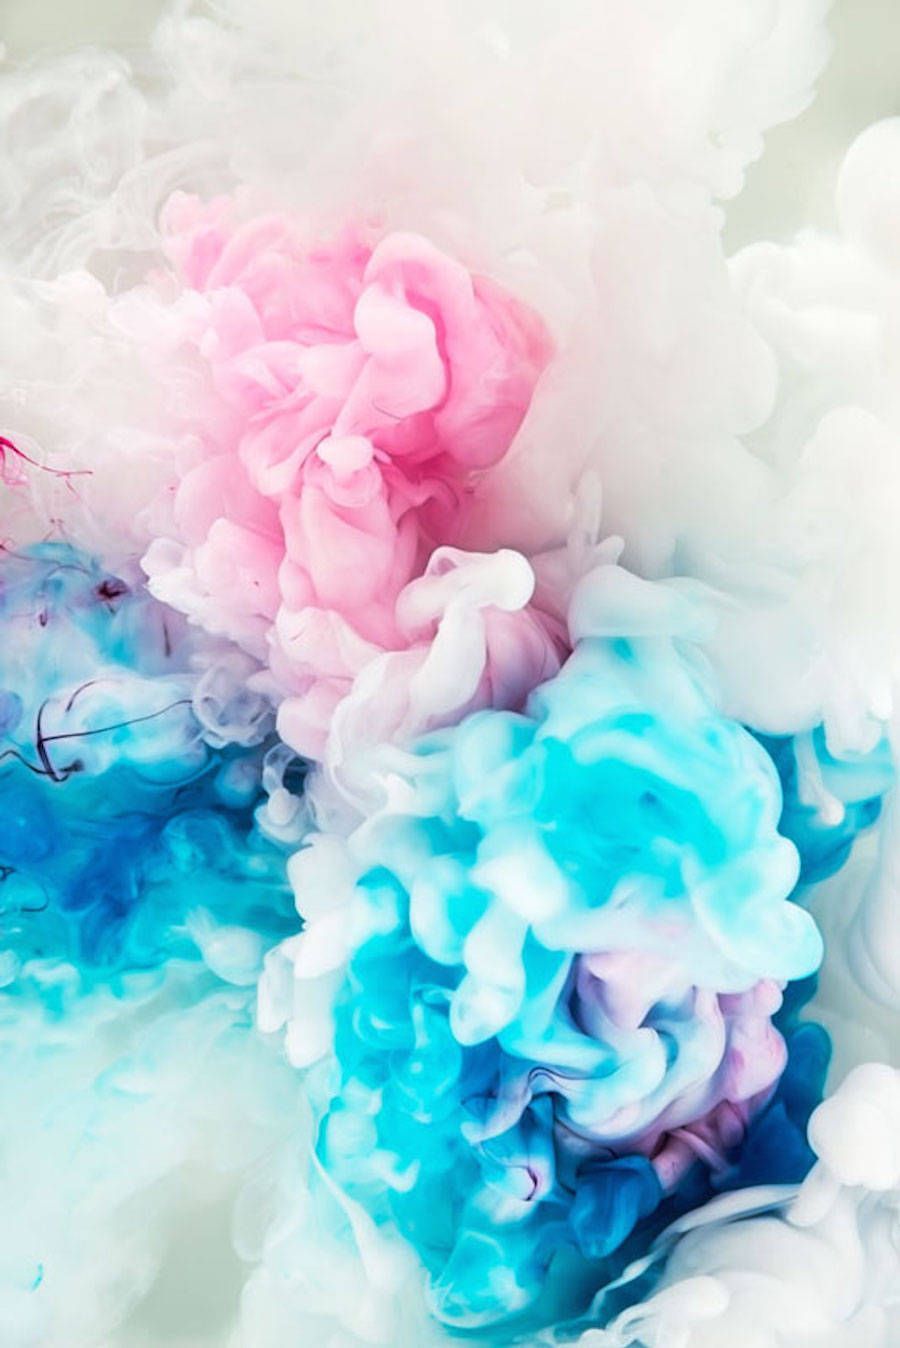 Aesthetic Colored Abstract Ink Explosions Trending Smoke